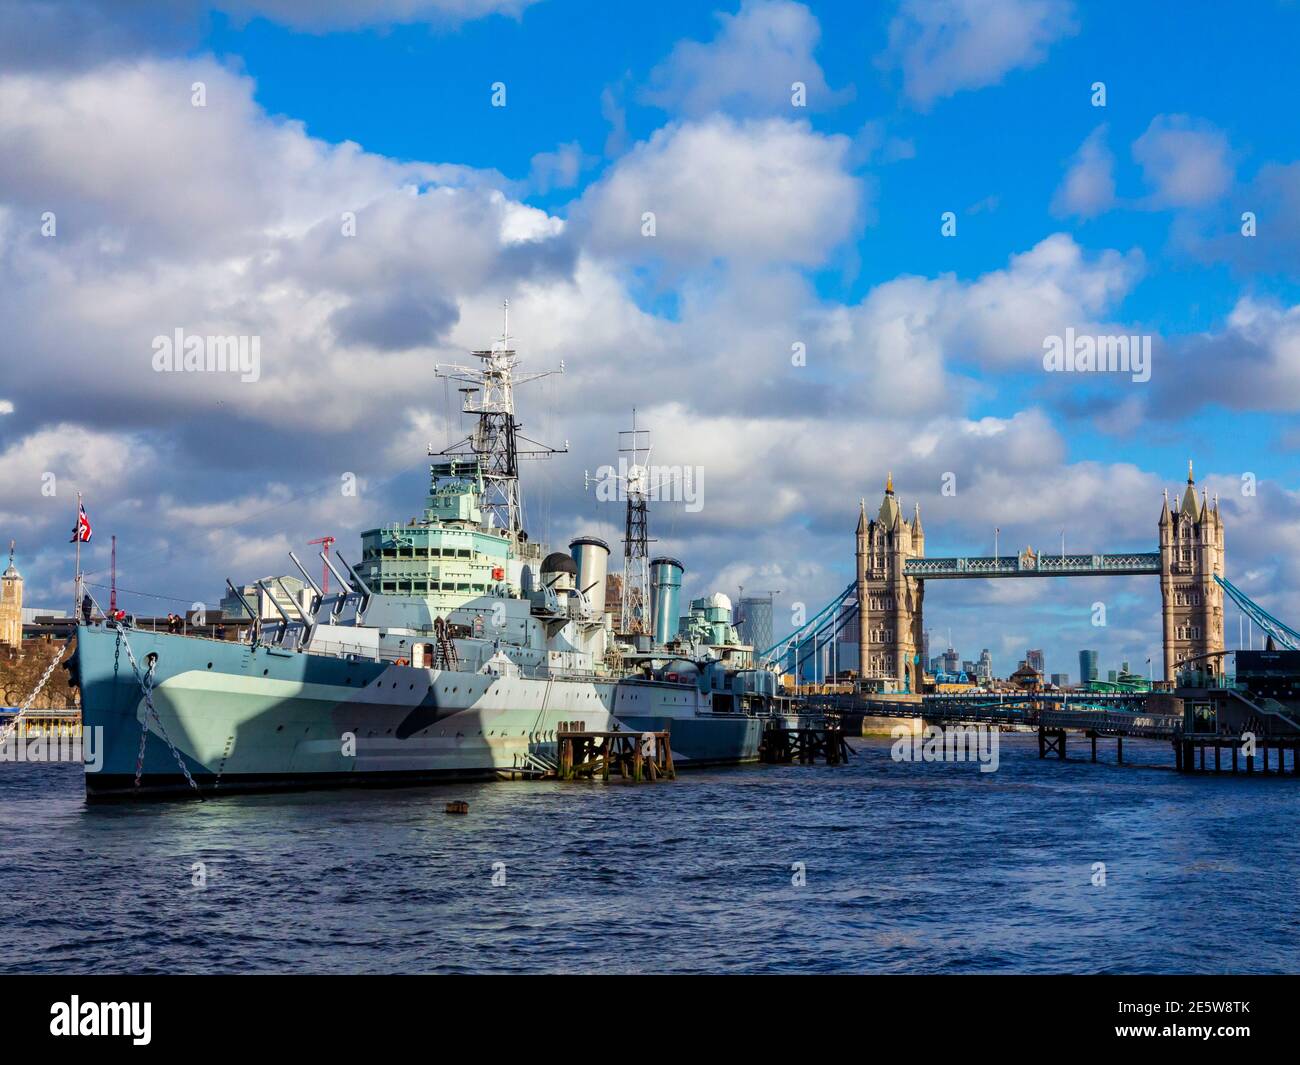 HMS Belfast a British Royal Navy Town Class light cruiser launched in 1936 now a floating museum ship on the River Thames in London England UK Stock Photo